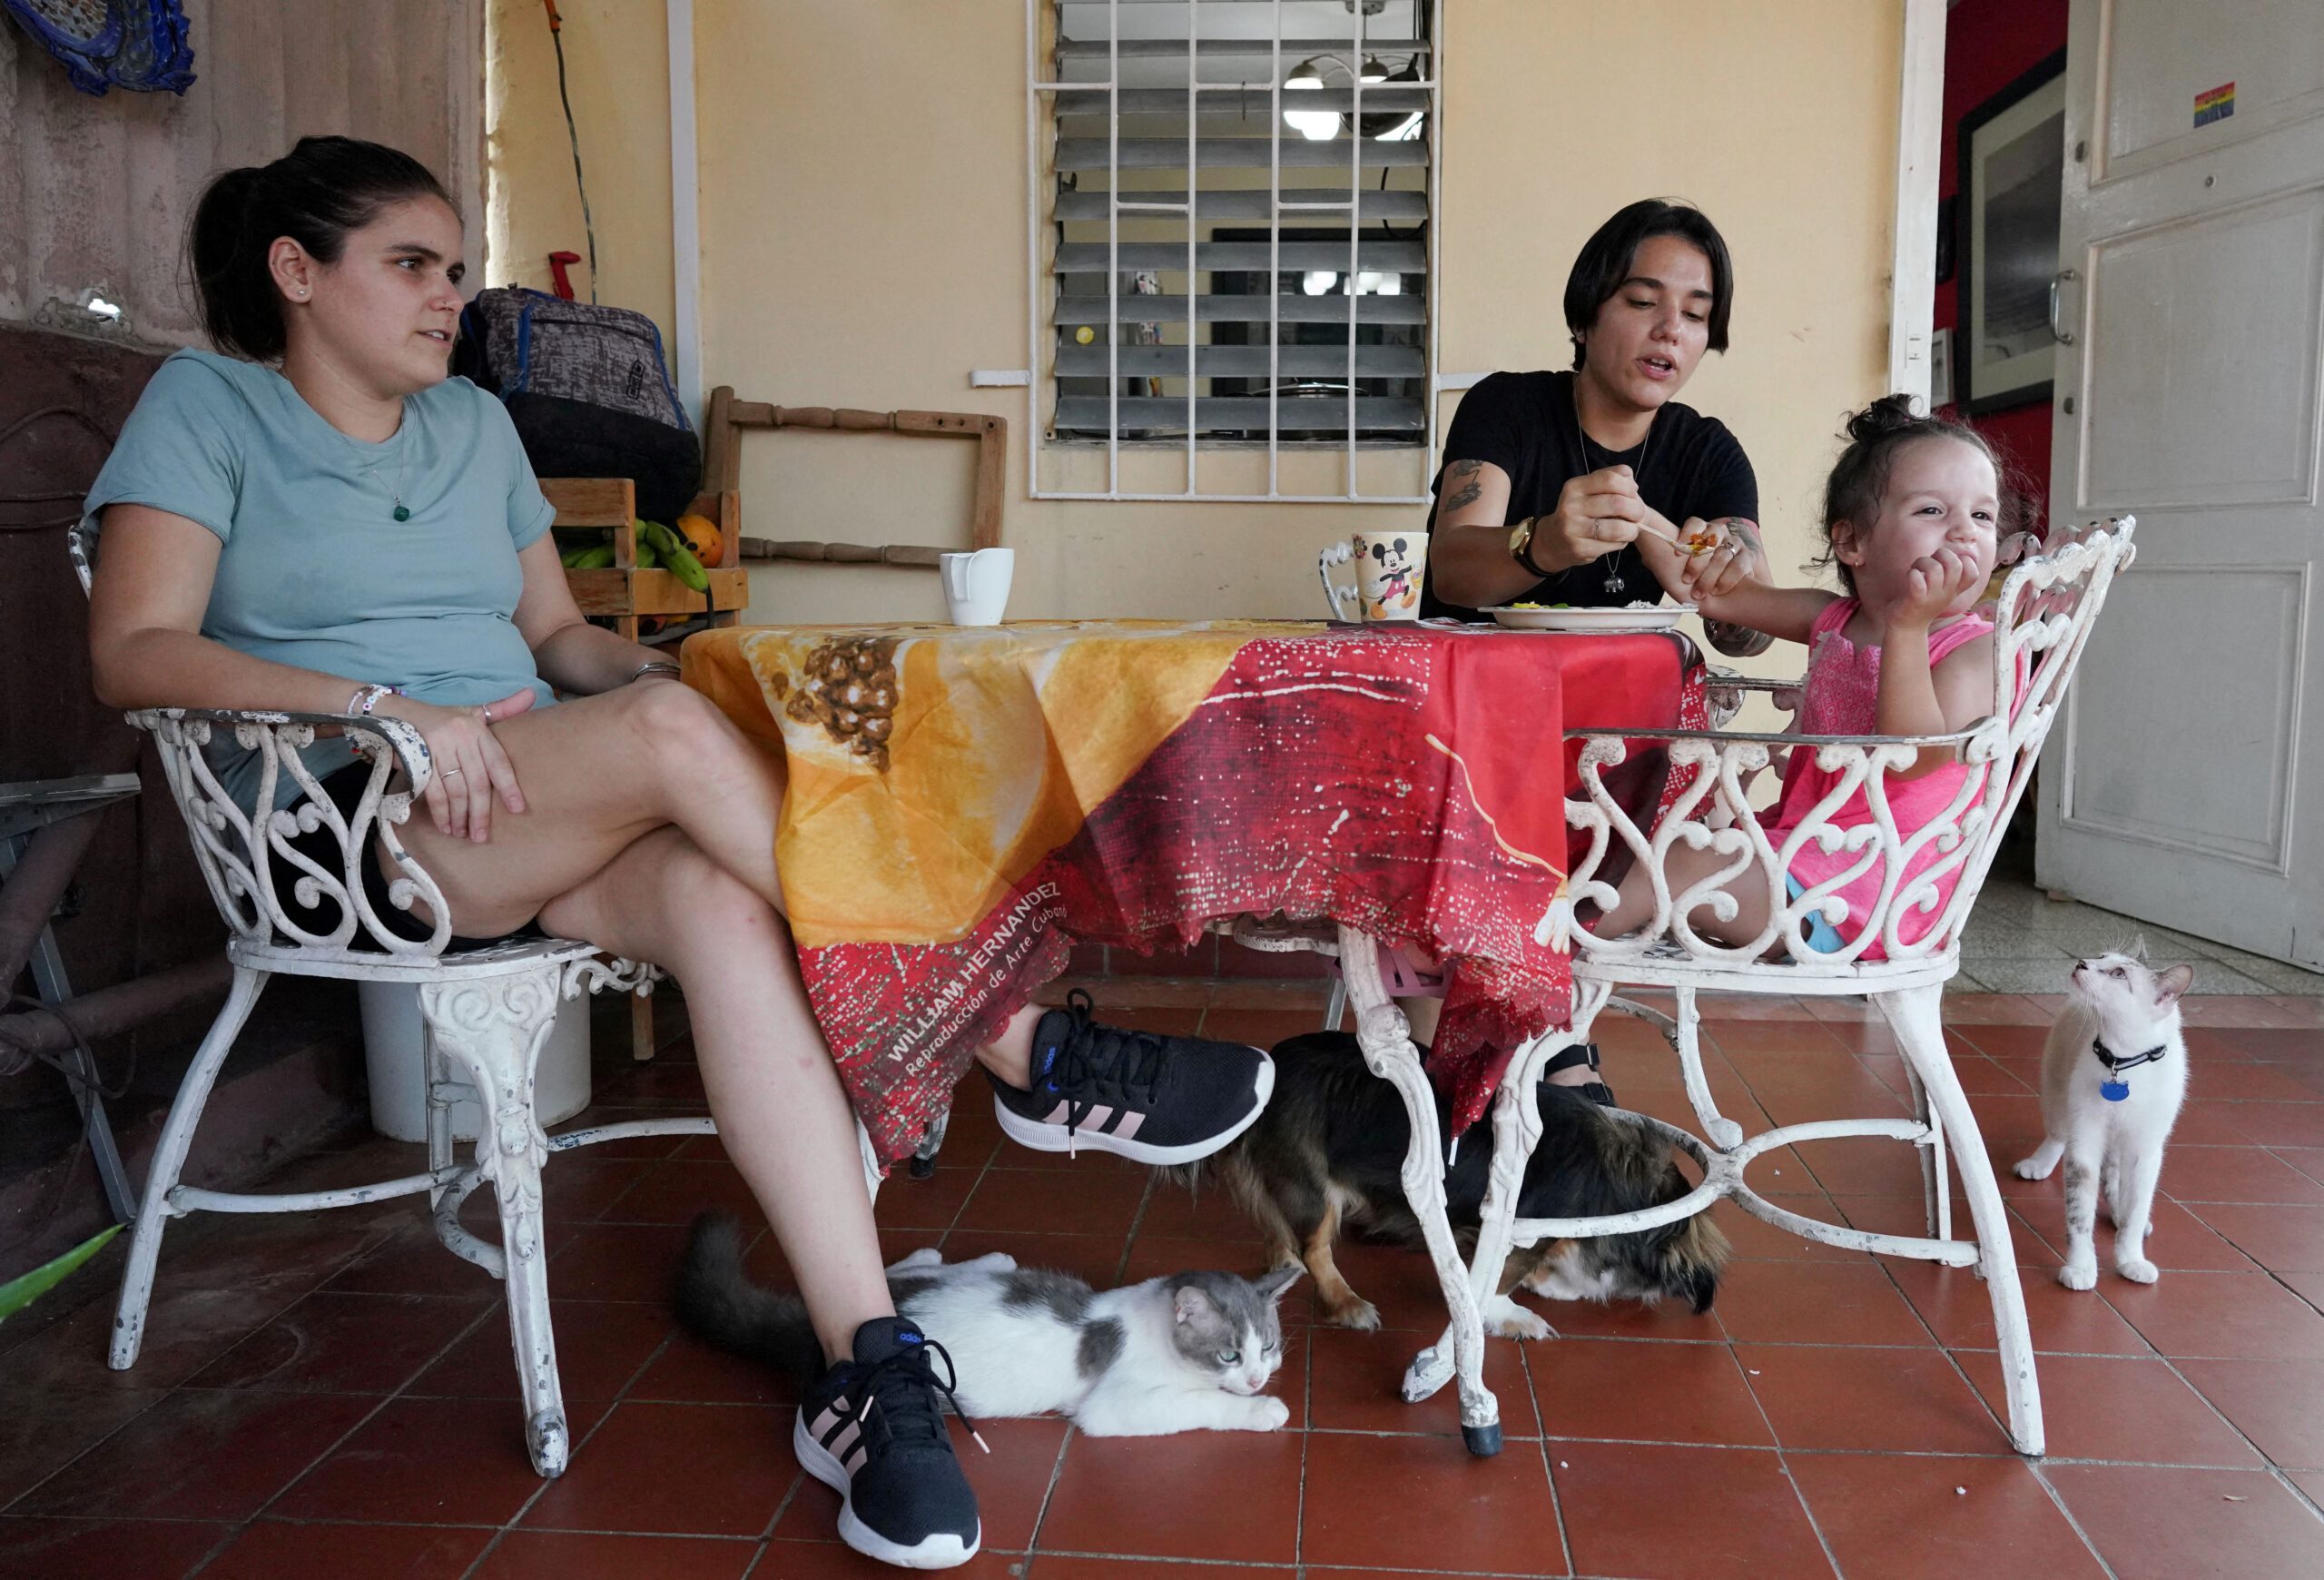 Cuba approves law change that opens door to gay marriage, other family rights